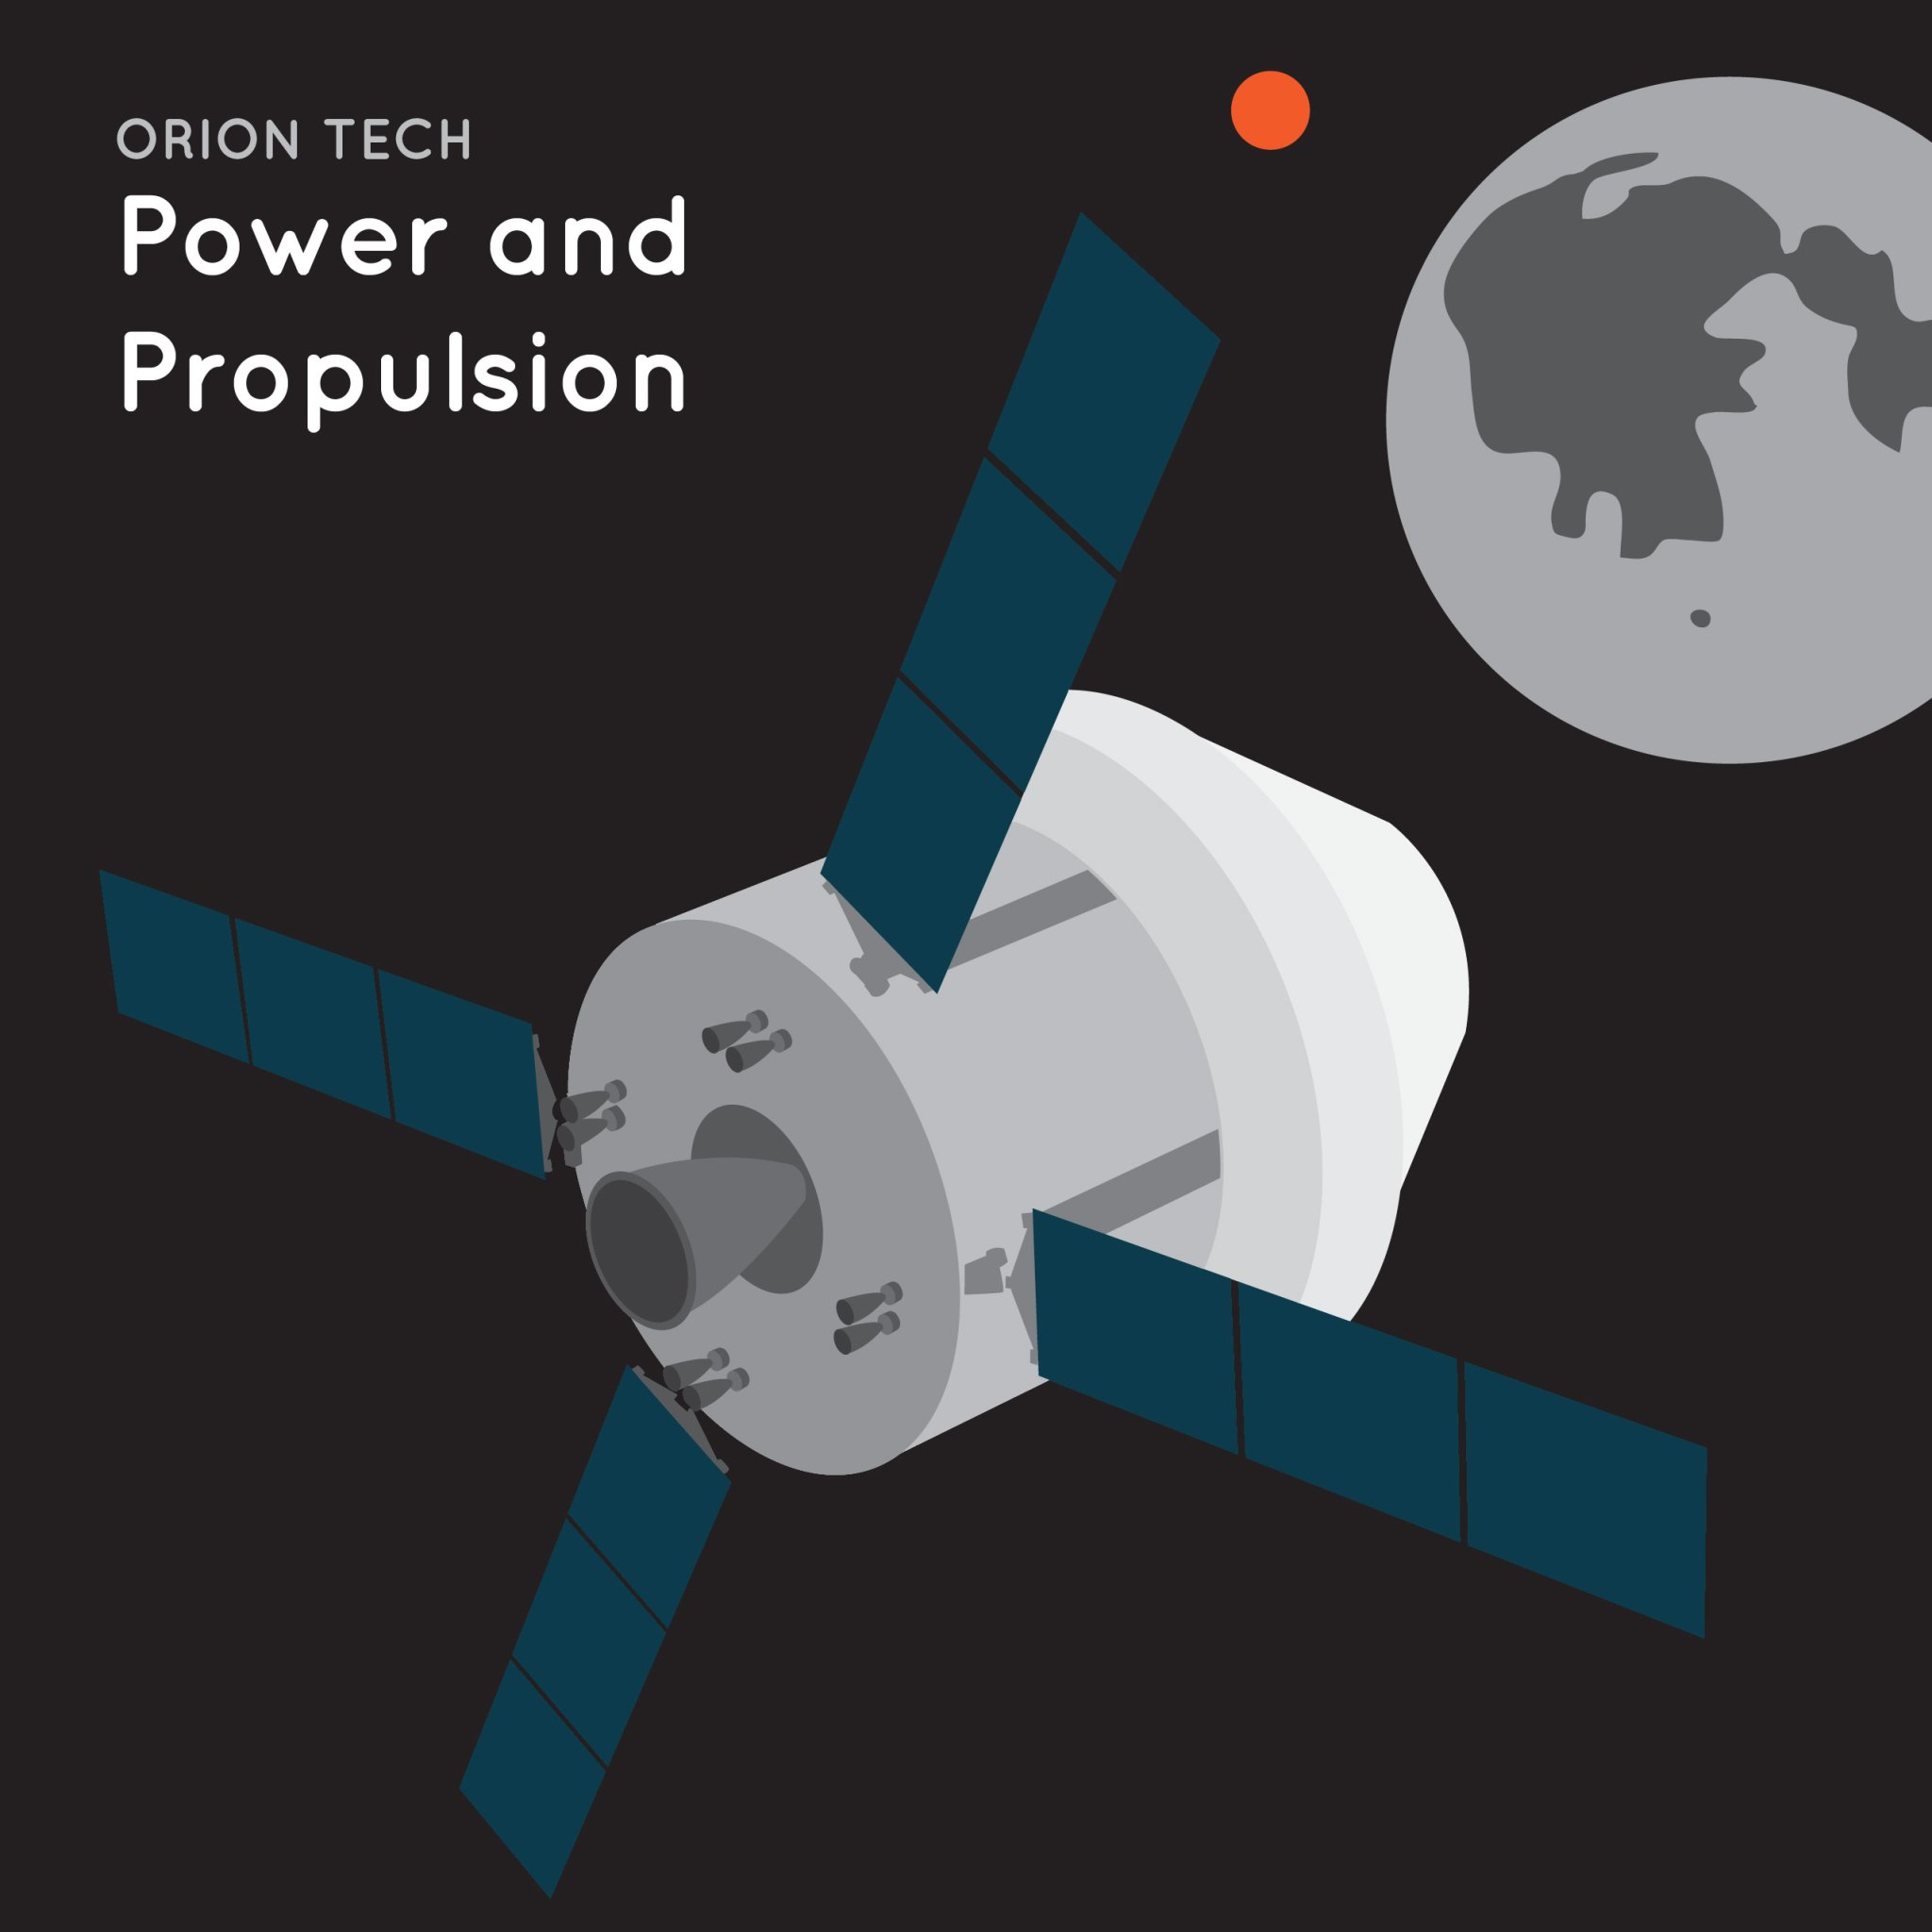 Orion Tech: Power and Propulsion